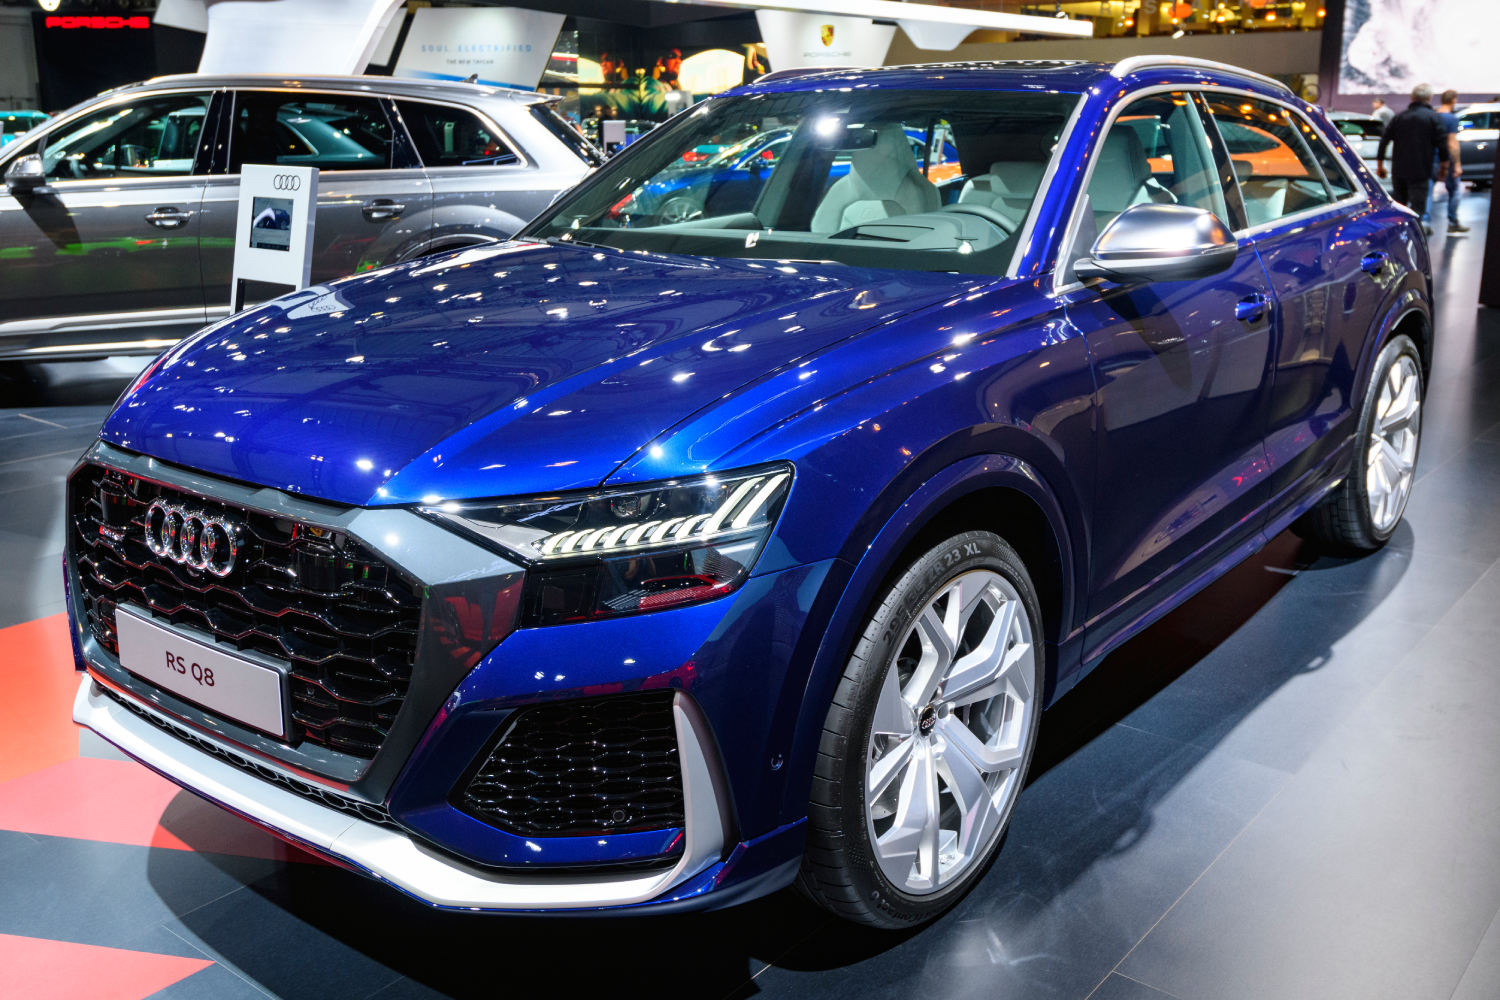 A child damaged an Audi Q8 like this one while bored at a dealership